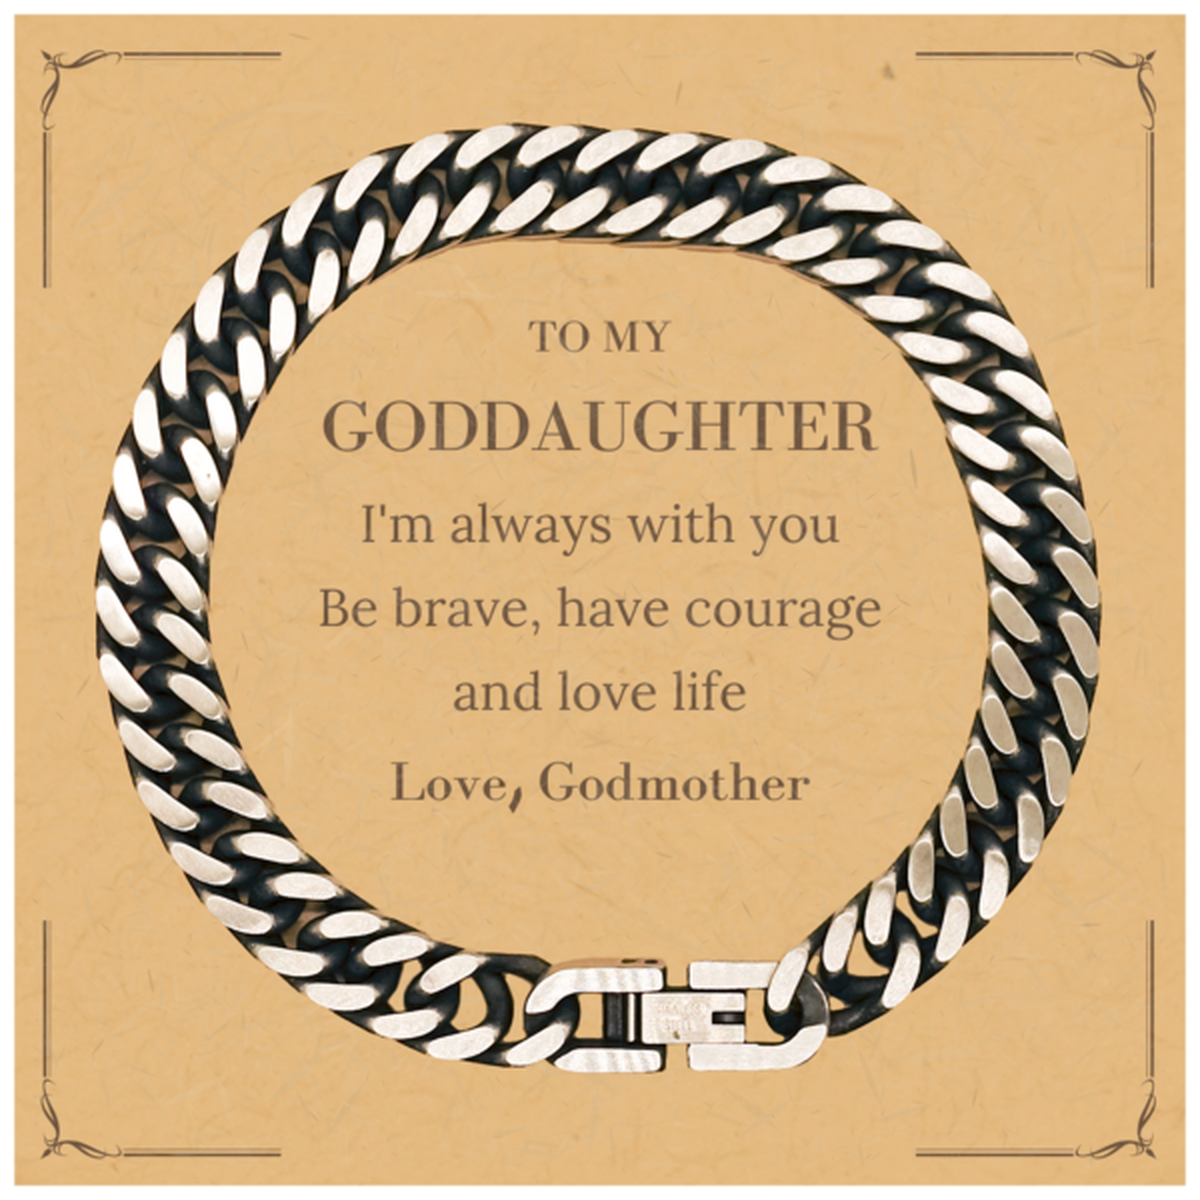 To My Goddaughter Gifts from Godmother, Unique Cuban Link Chain Bracelet Inspirational Christmas Birthday Graduation Gifts for Goddaughter I'm always with you. Be brave, have courage and love life. Love, Godmother